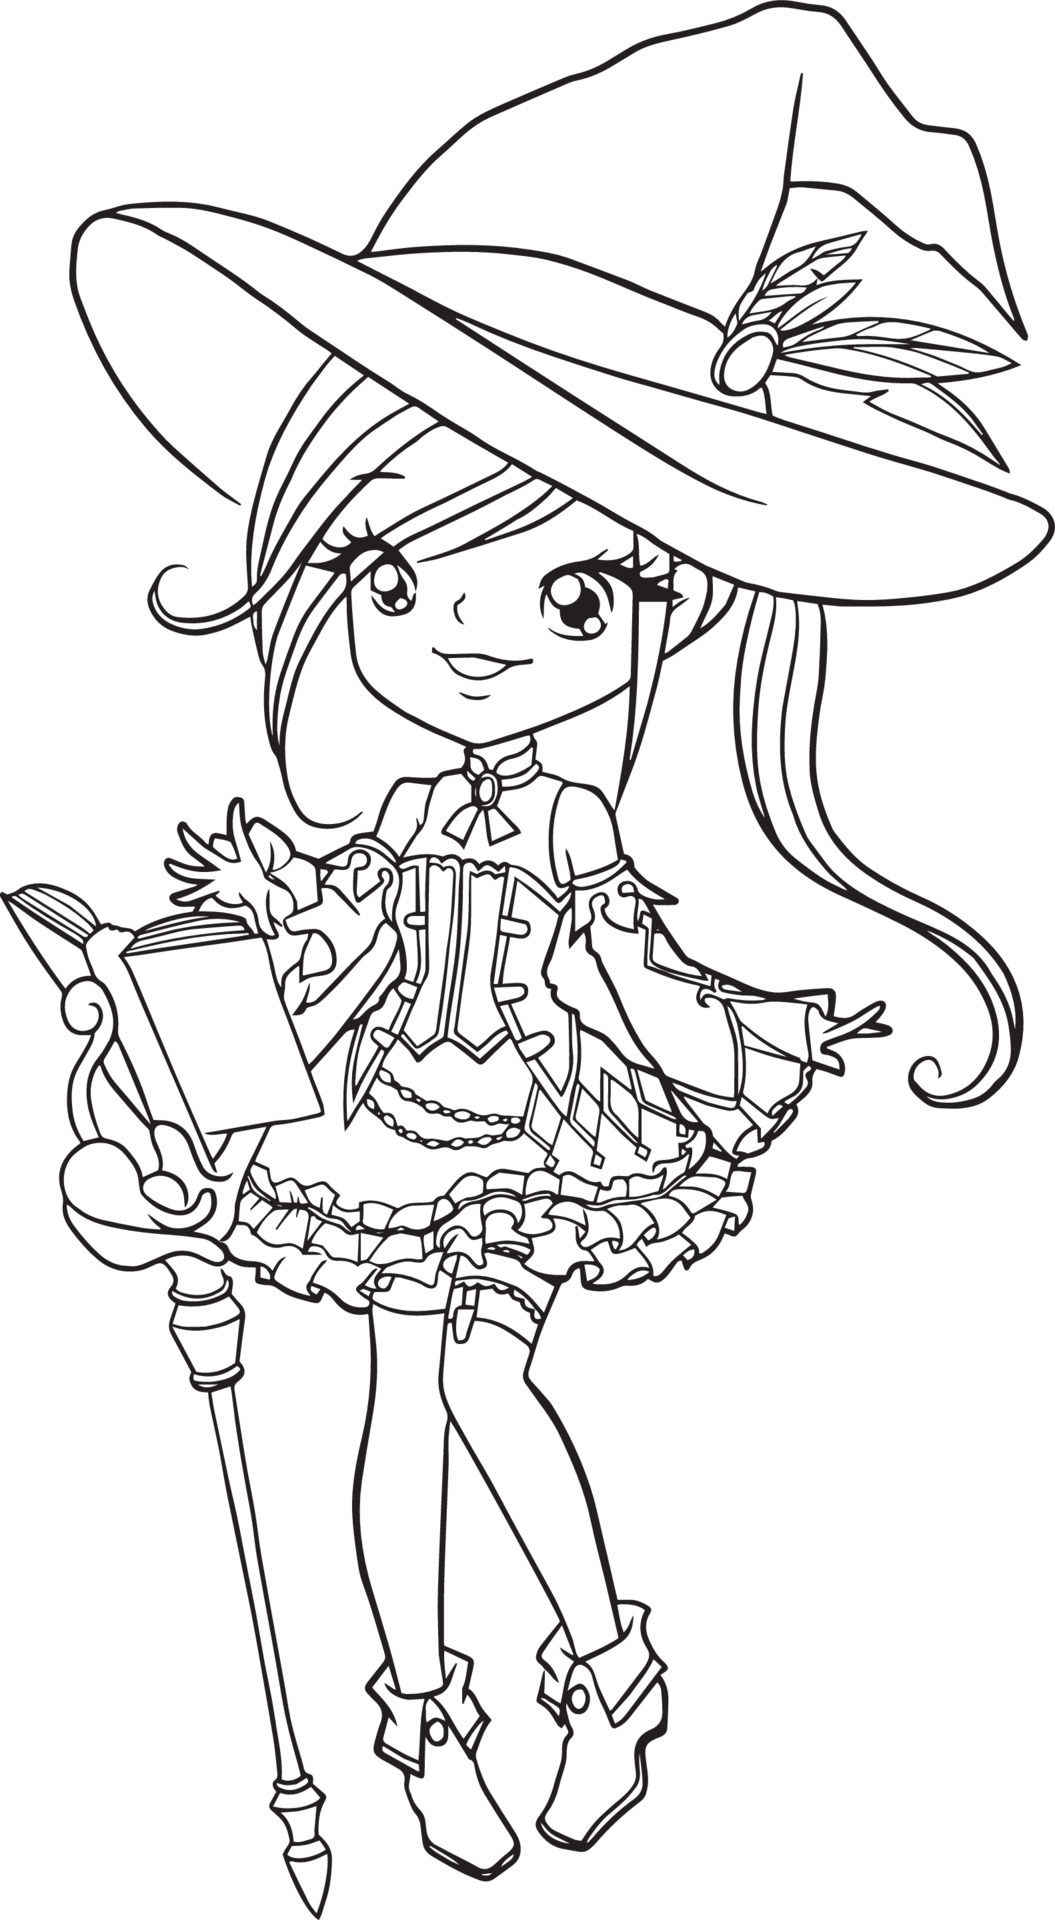 witch girl cartoon doodle kawaii anime coloring page cute ...